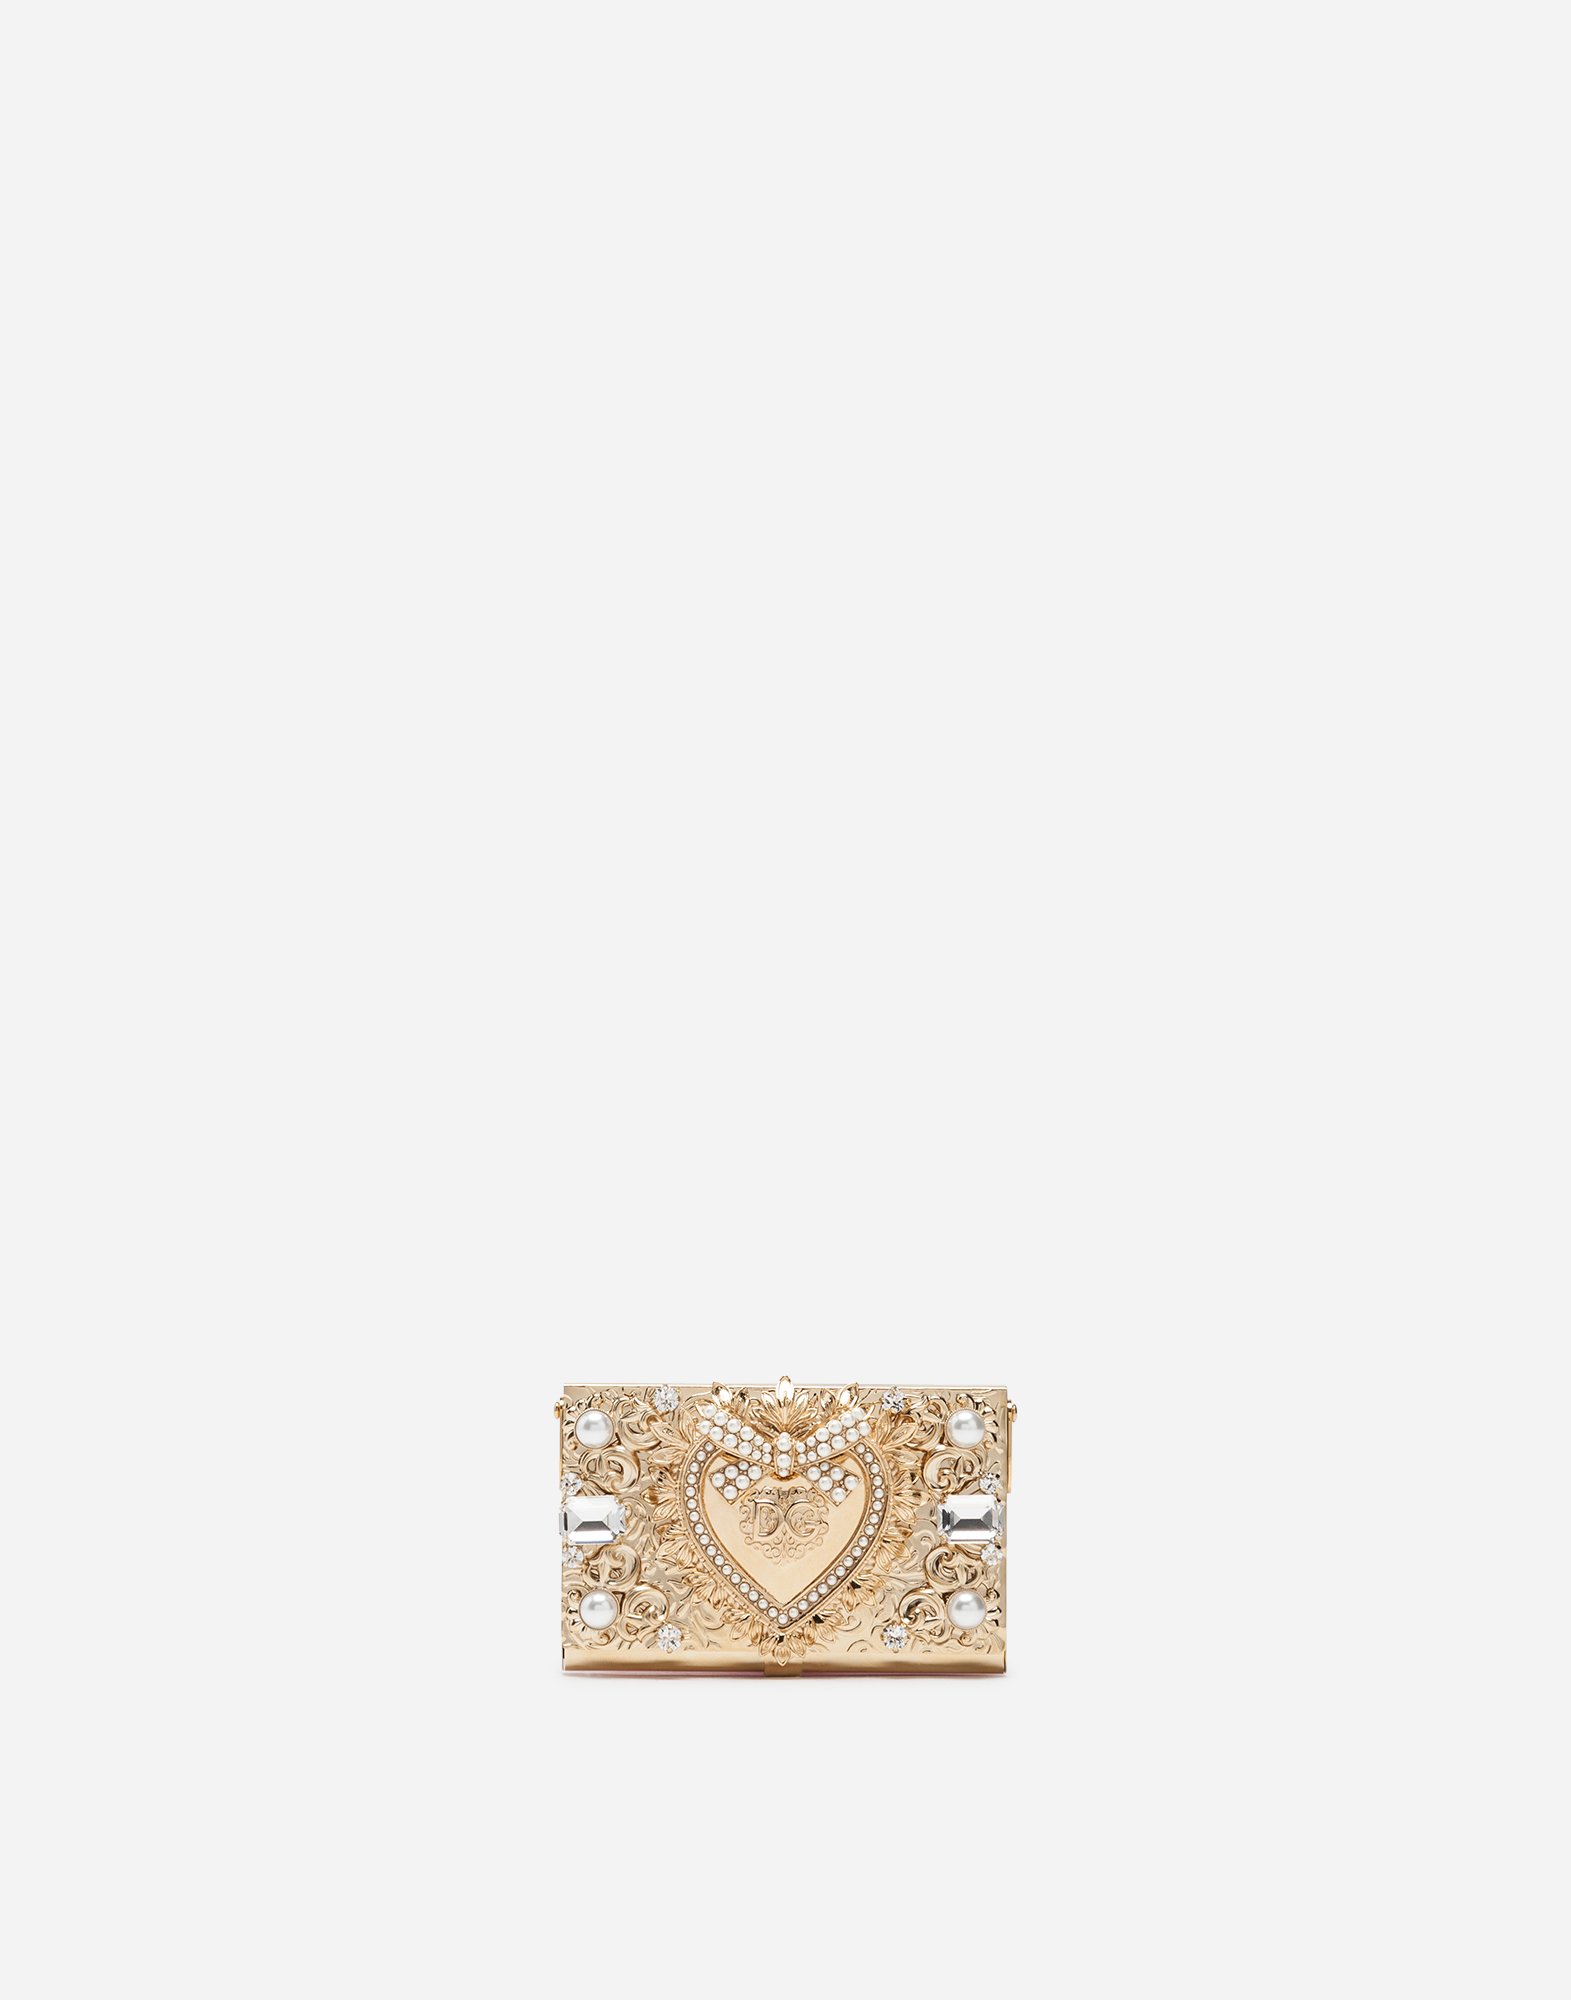 Jewel micro-bag with chain in Gold